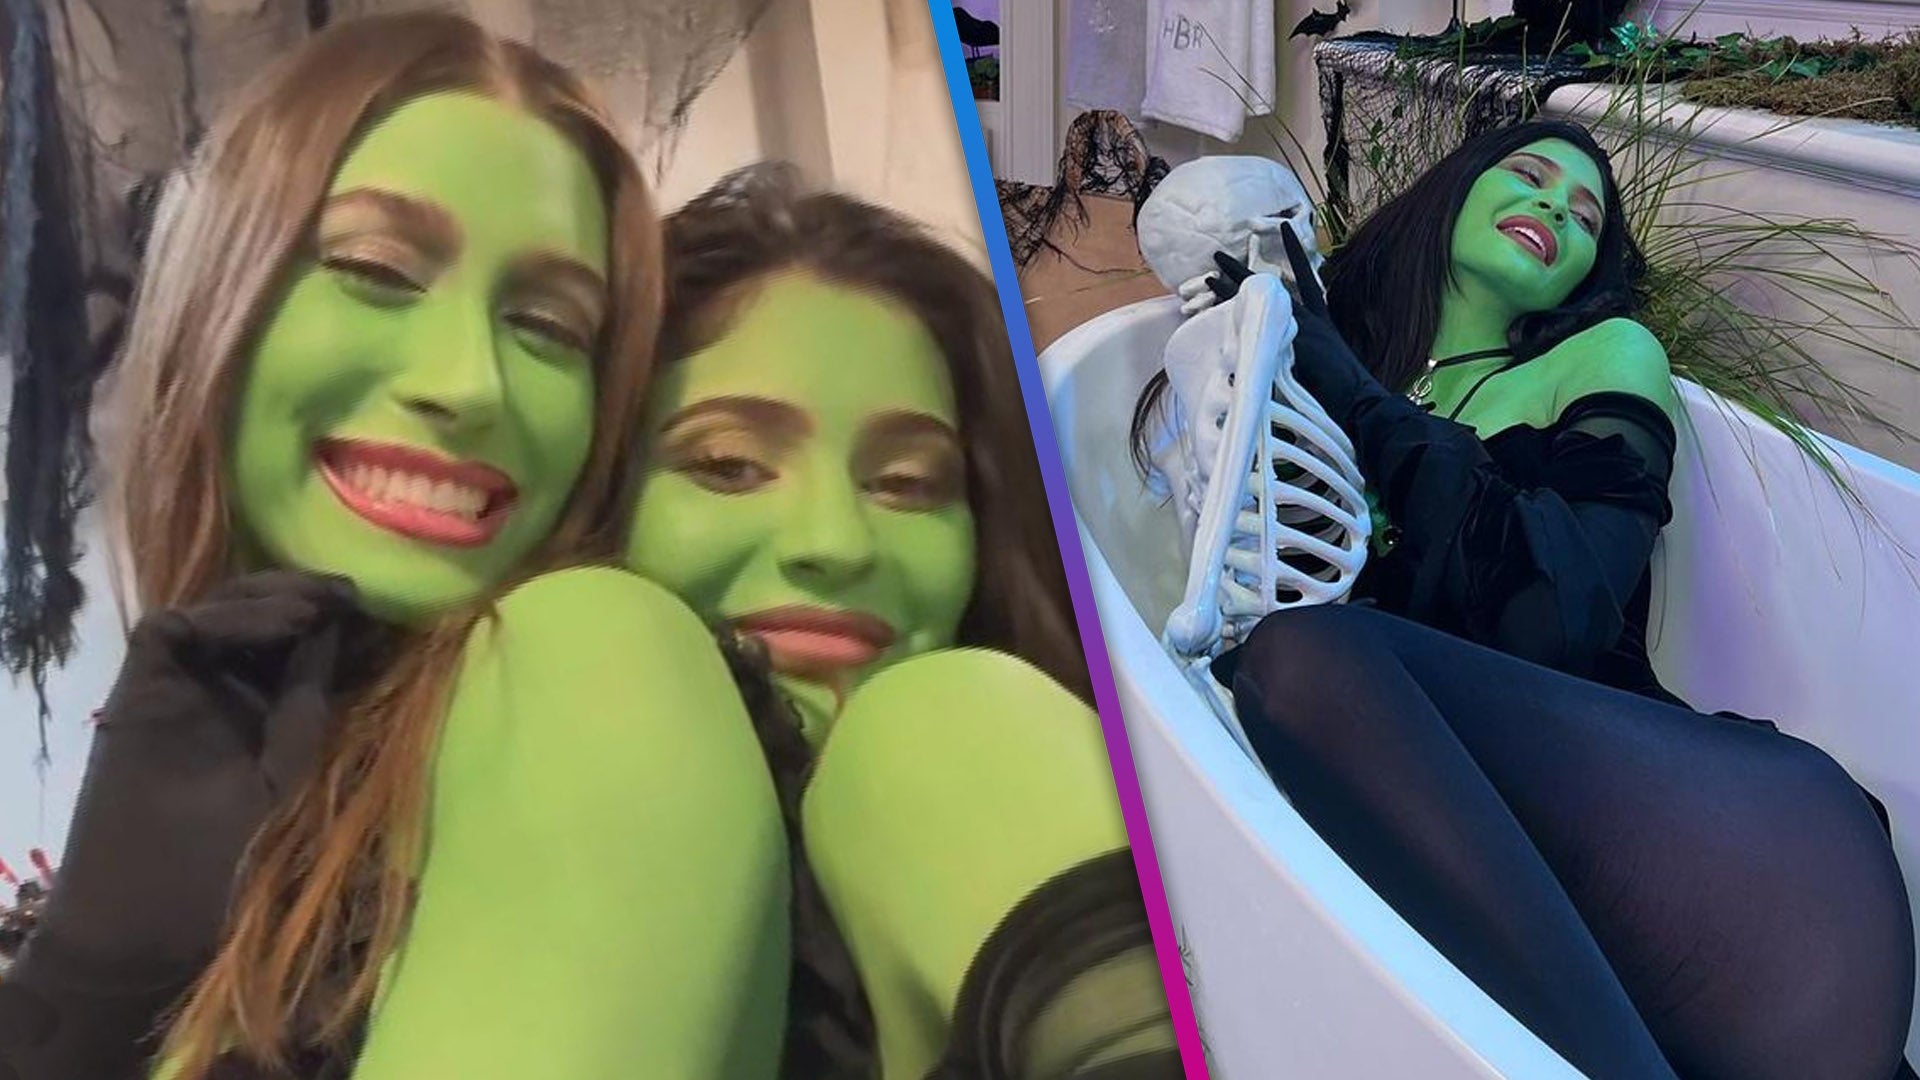 Kylie Jenner and Hailey Bieber Go on Wacky Adventure in Full Green Body  Paint!